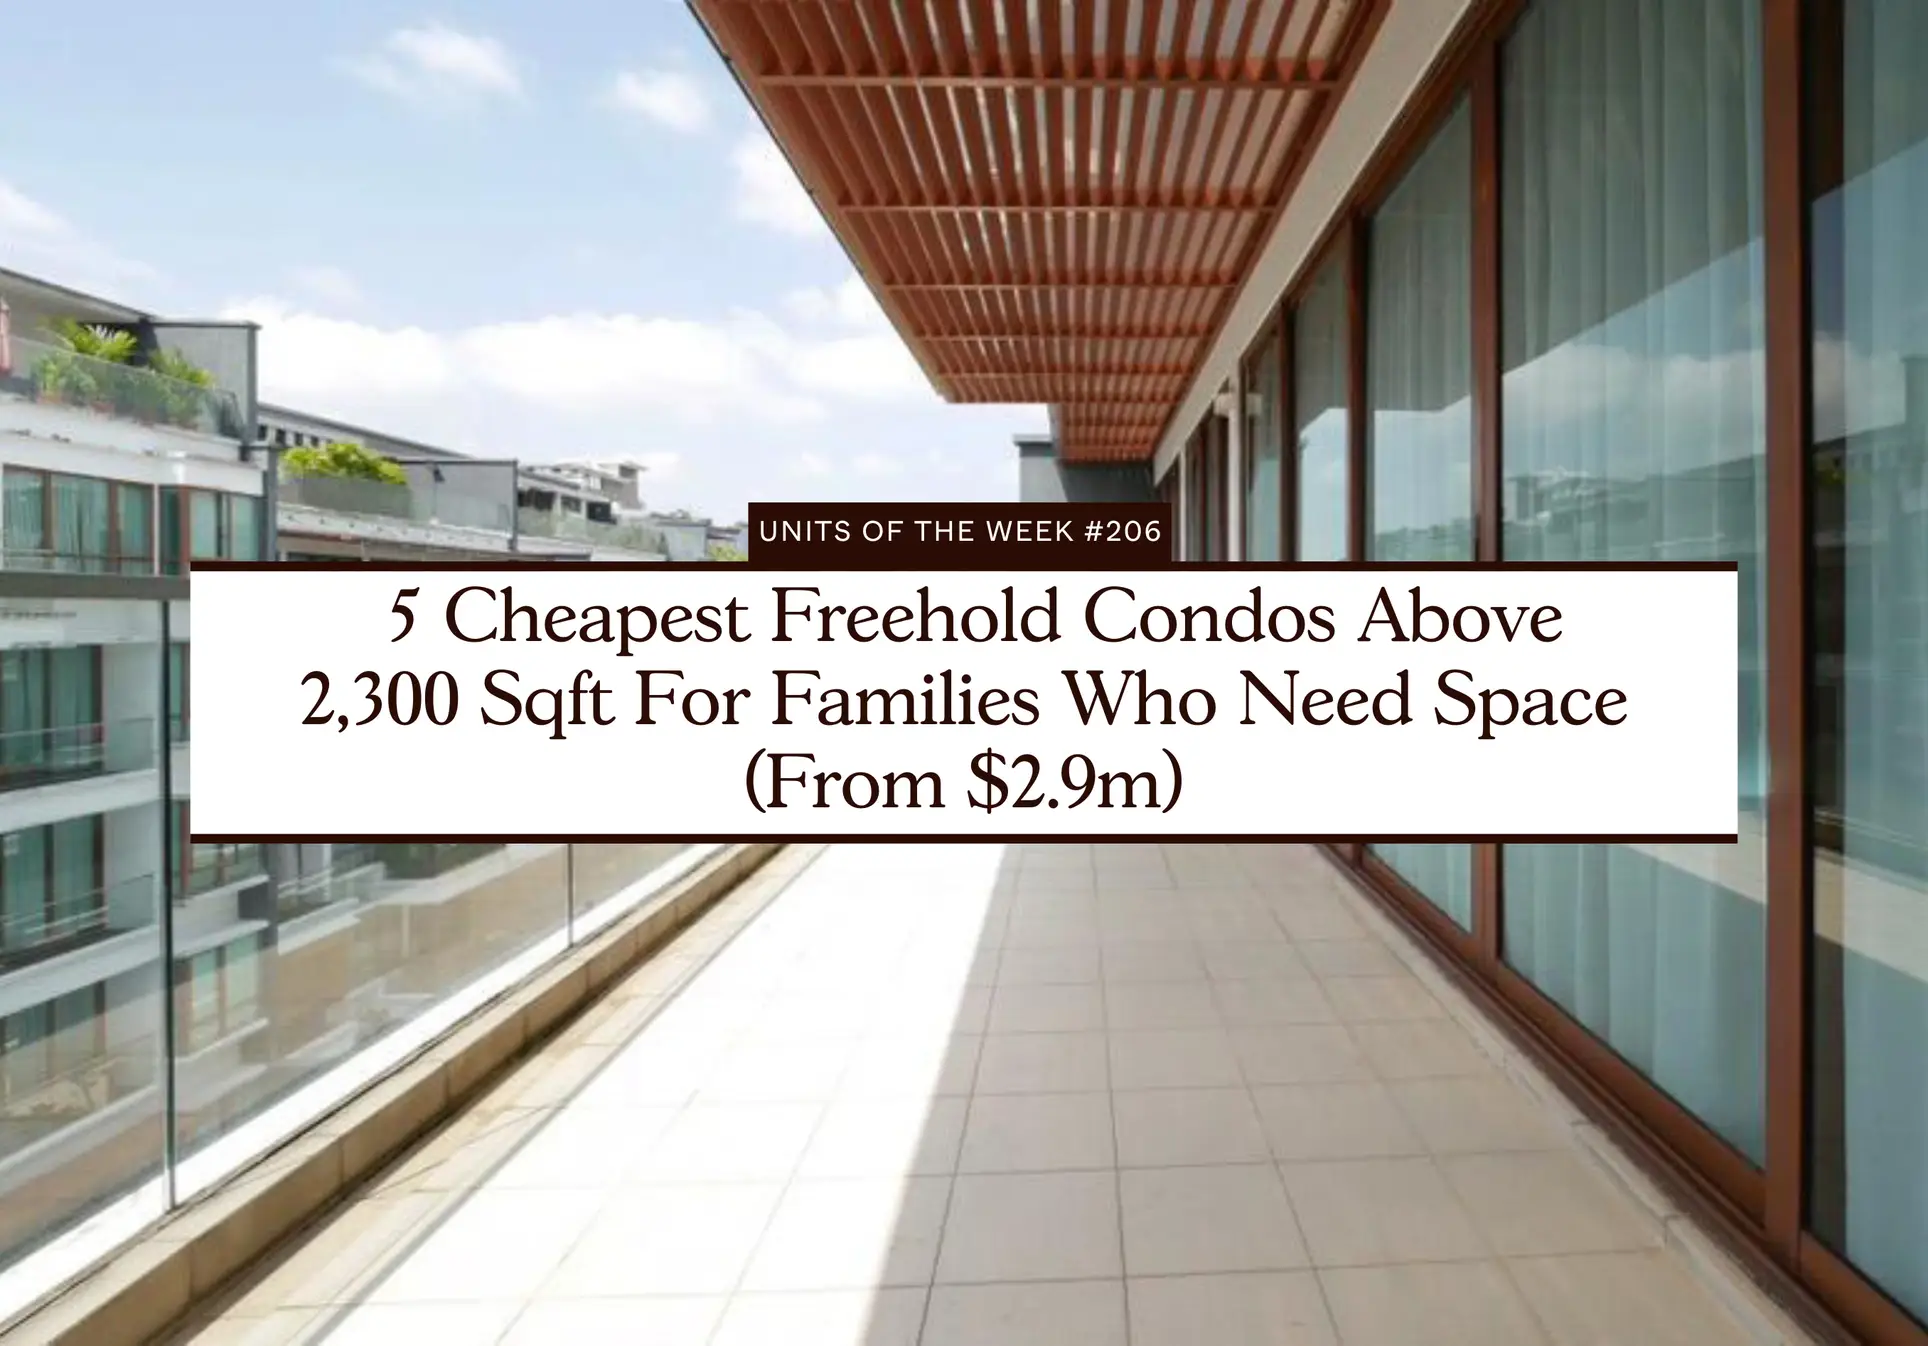 5 Cheapest Freehold Condos Above 2300 Sqft For Families Who Need Space From 2.9m